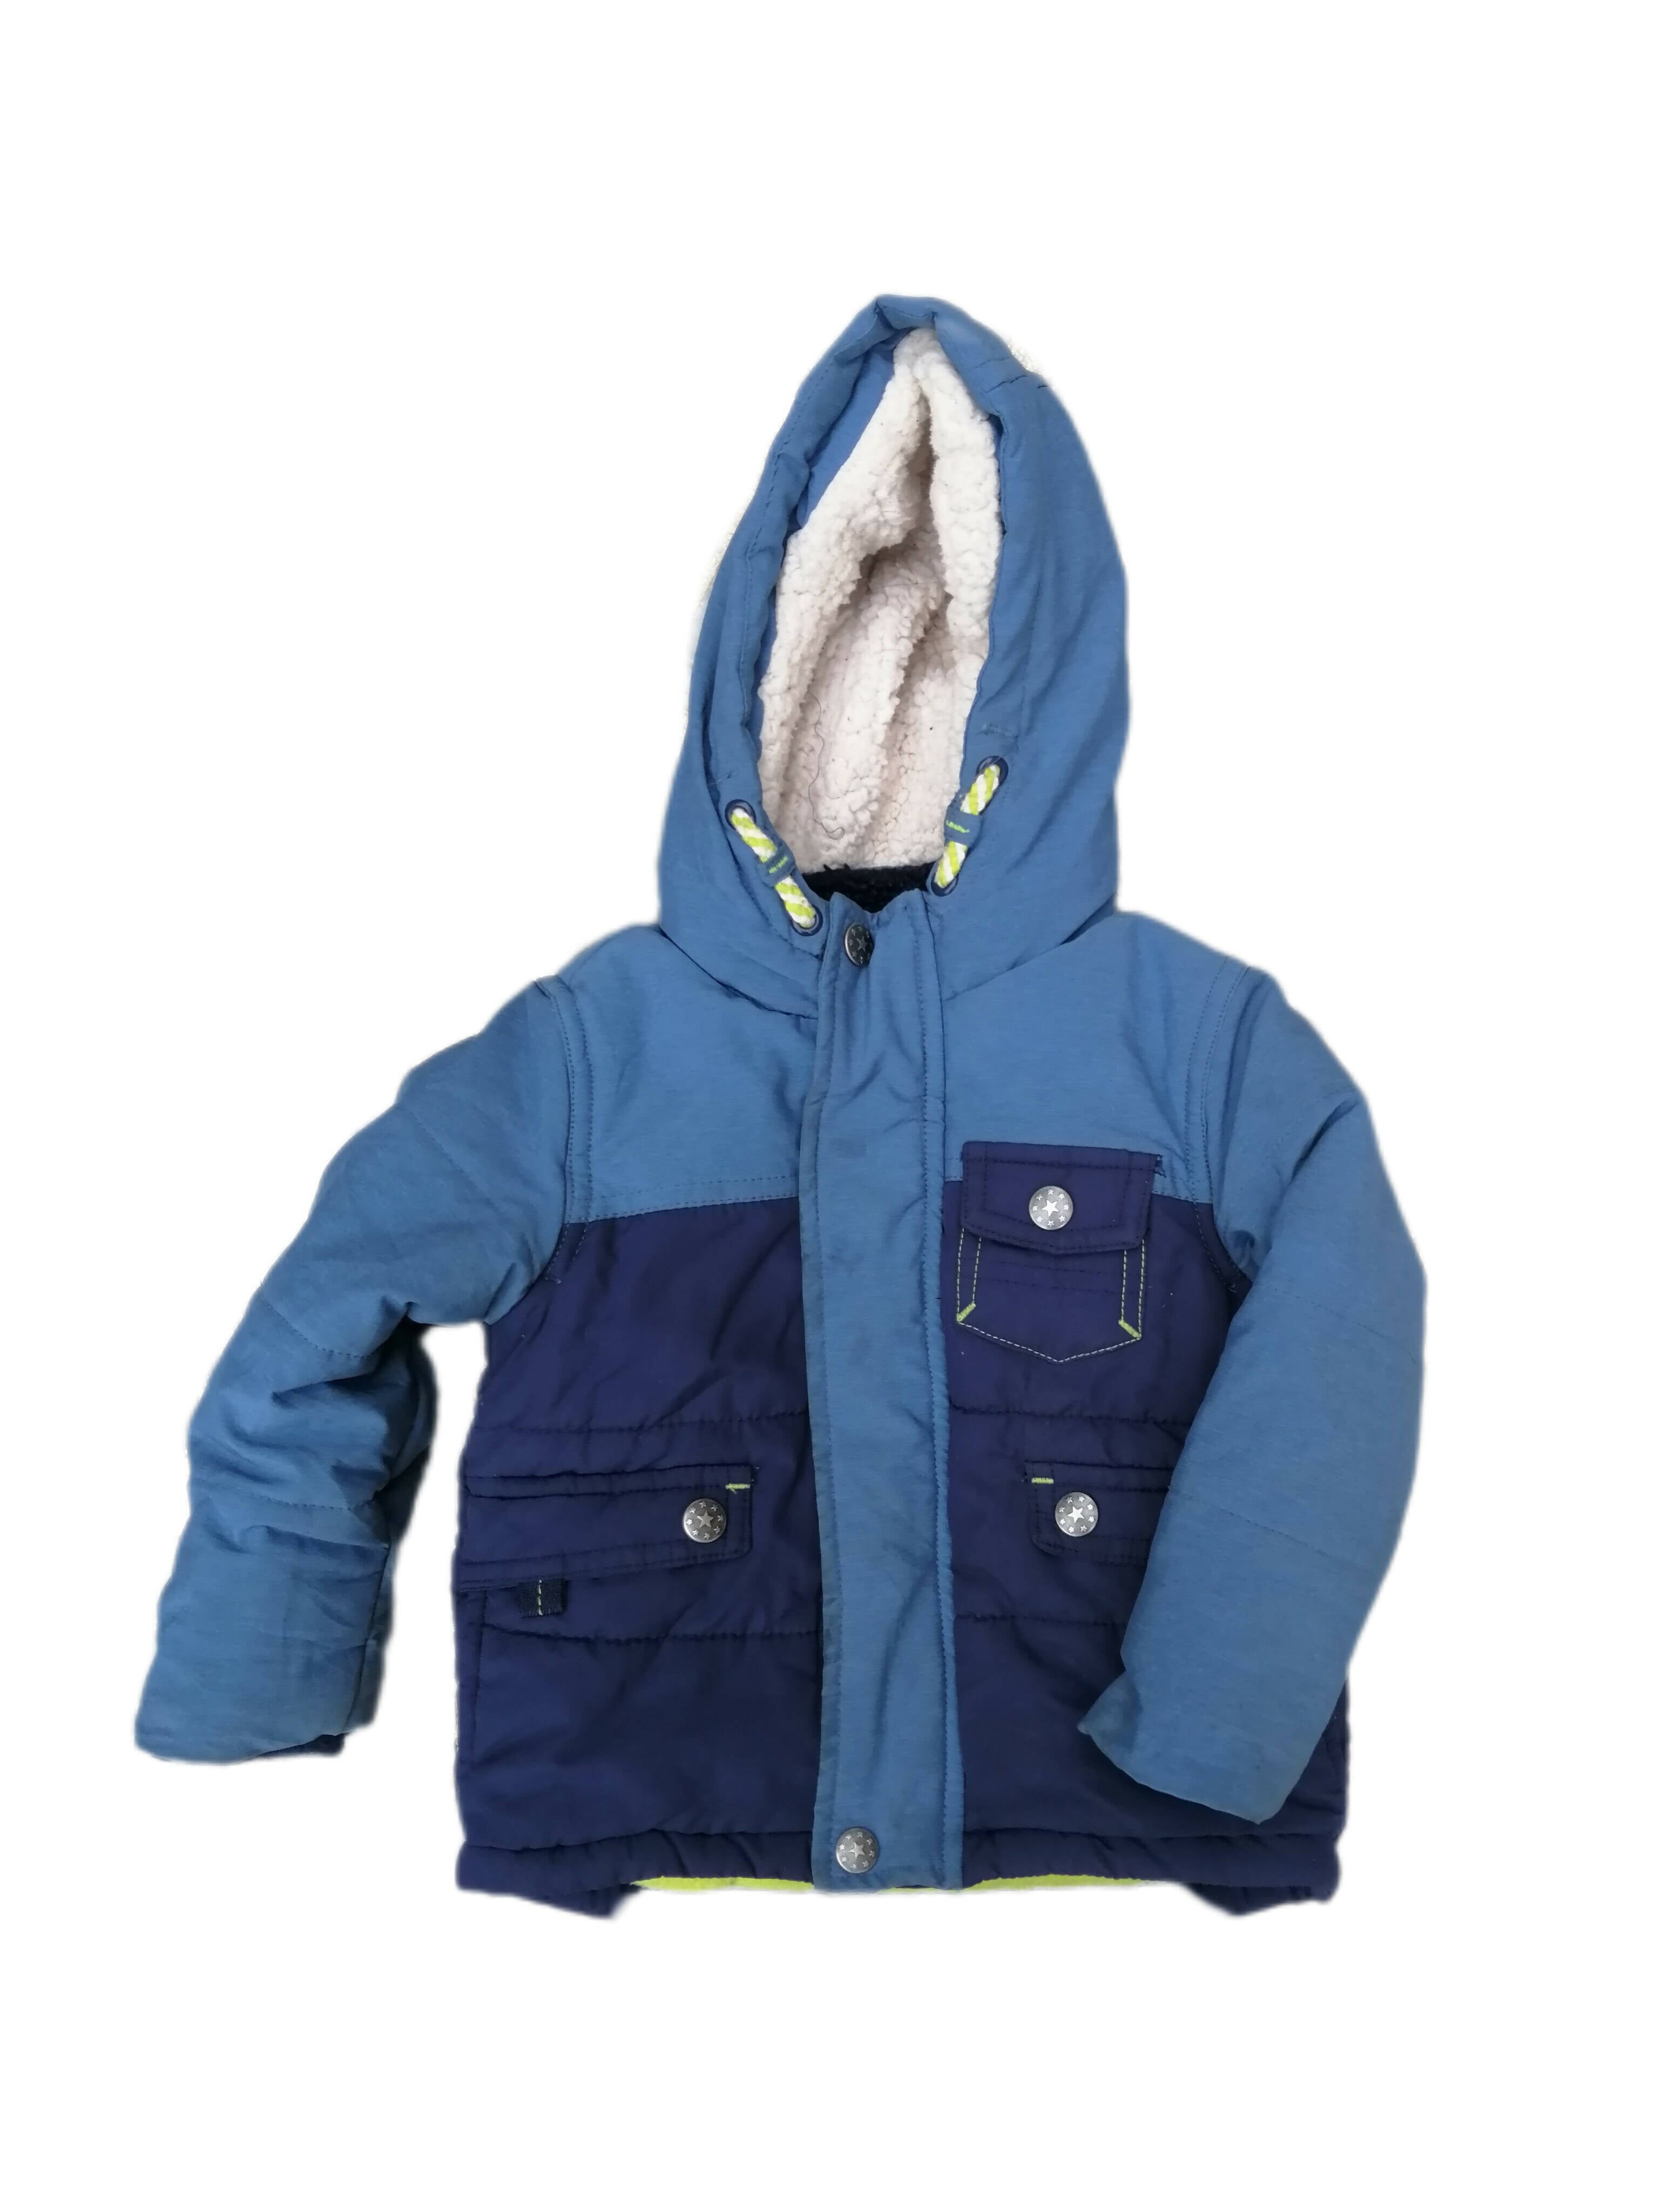 Mothercare | Blue jacket (Size: M ) | Kids Sweaters & Jackets | Worn Once